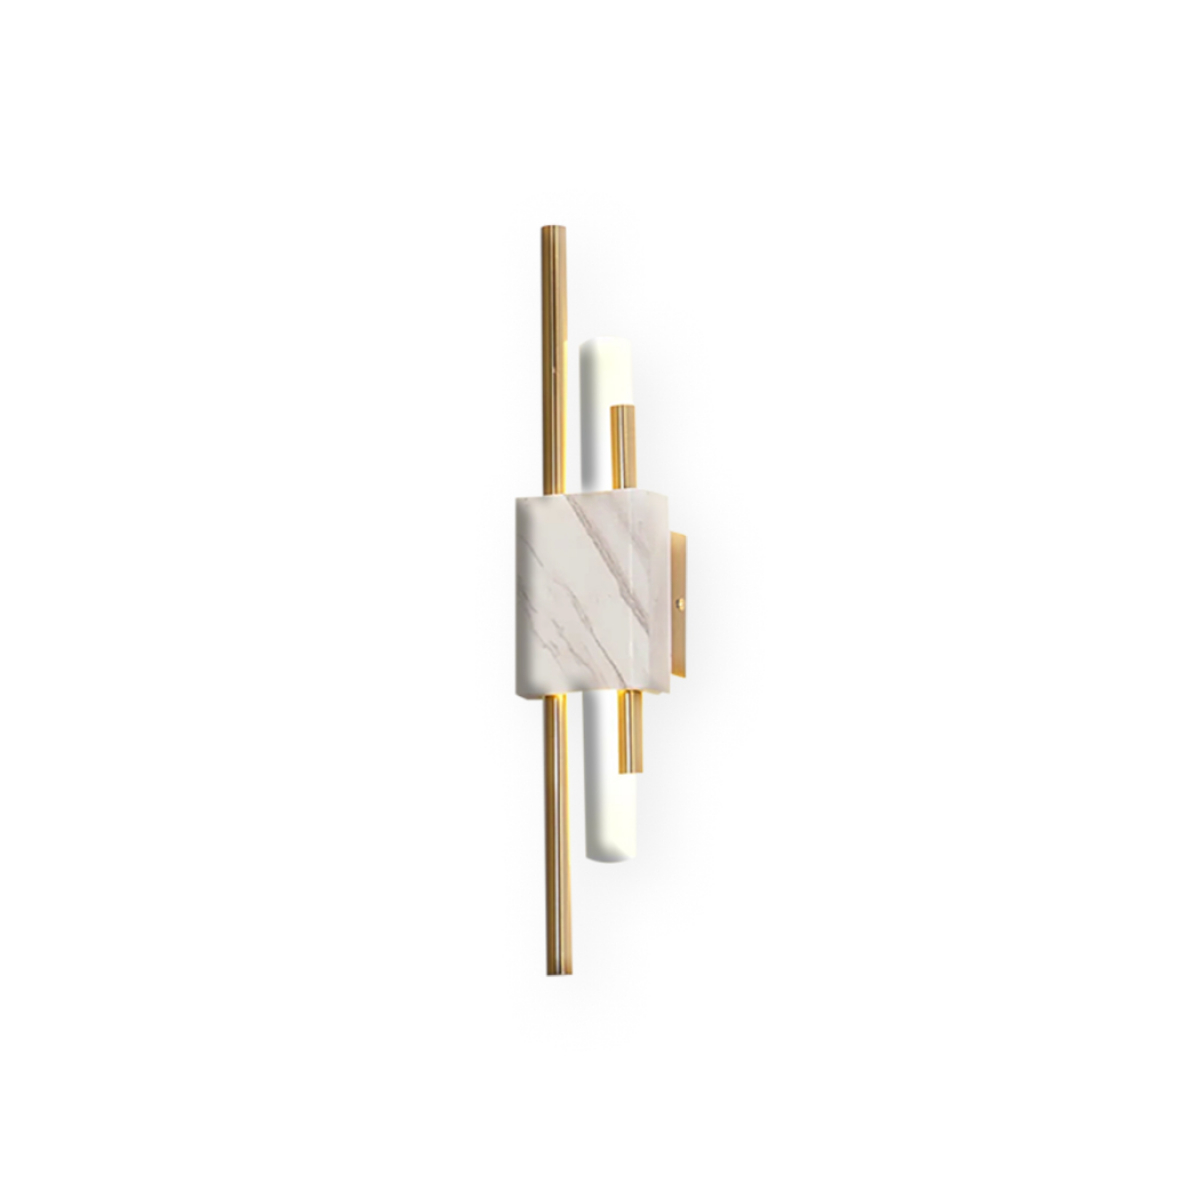 NORDIC TORCH WALL LIGHT